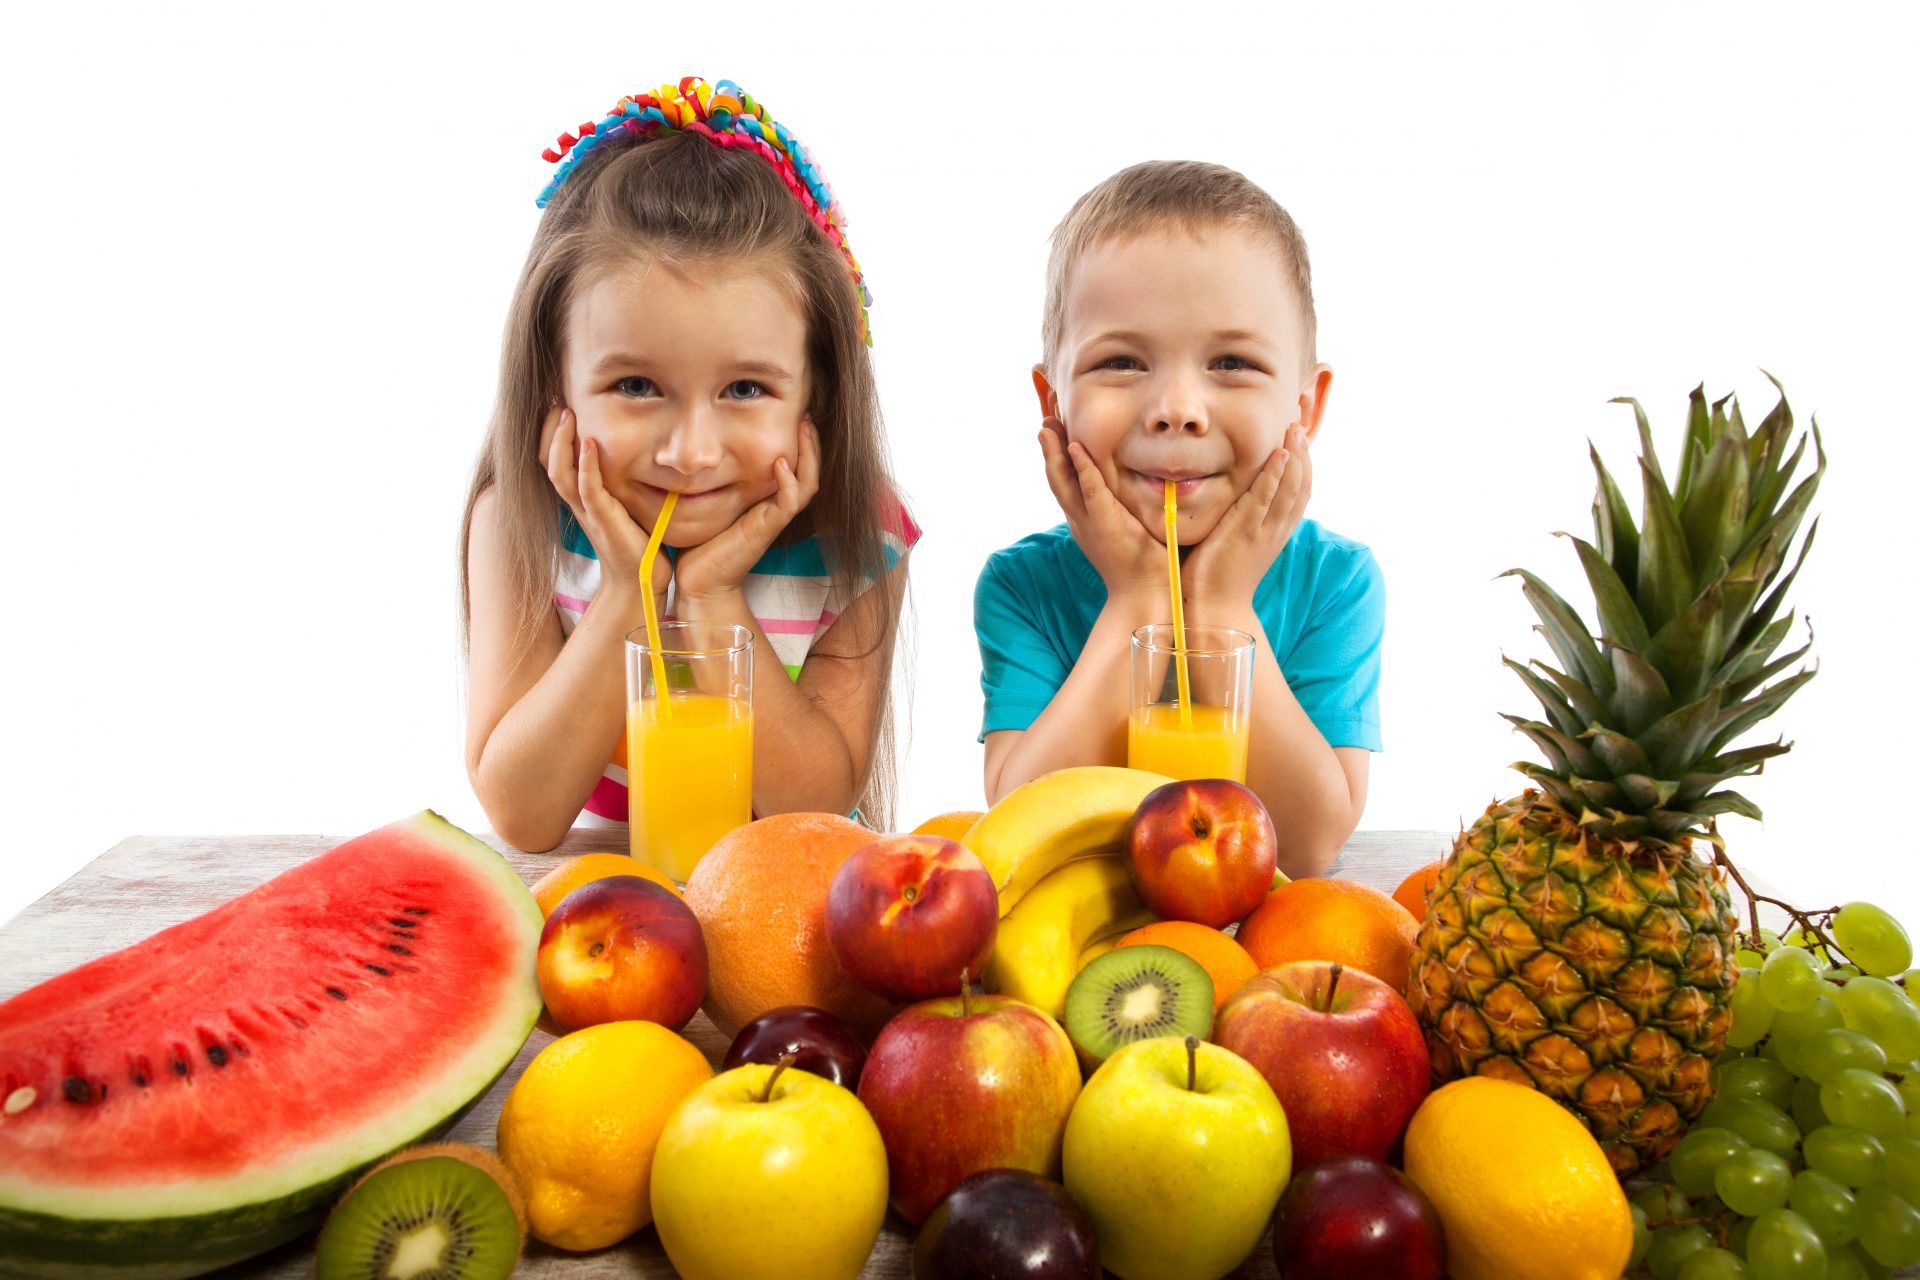 4 Fun & Unique Ways to Eat Fruit This Summer The Kidds Place